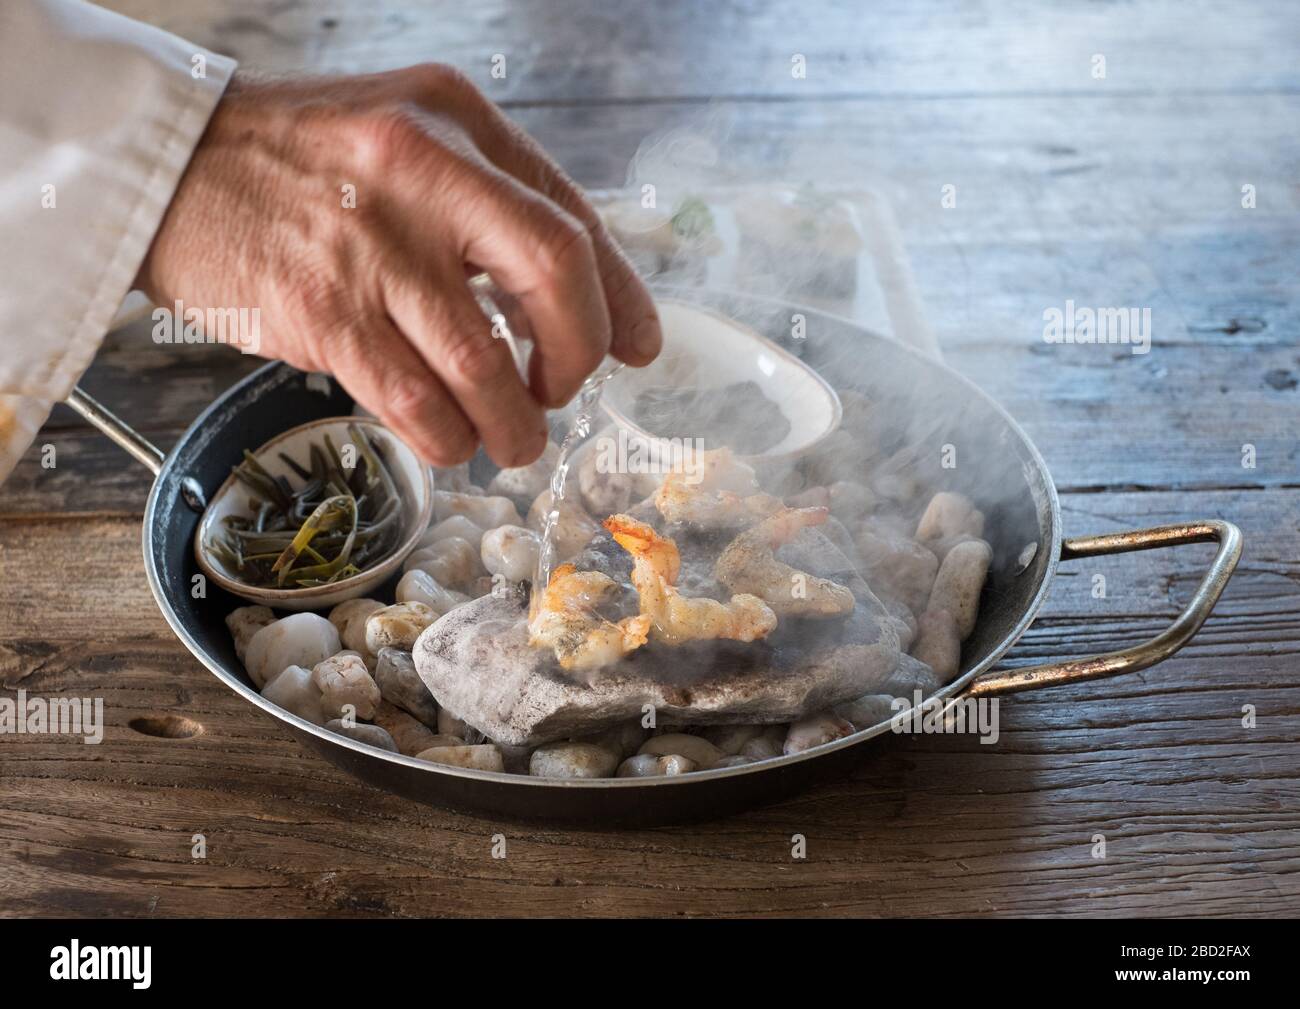 Chef Giannis Baxevanis pouring ouzo over shrimps cooked on pebbles, with white tarama mousse, at Six Keys restaurant on Greece's Pelion peninsula Stock Photo